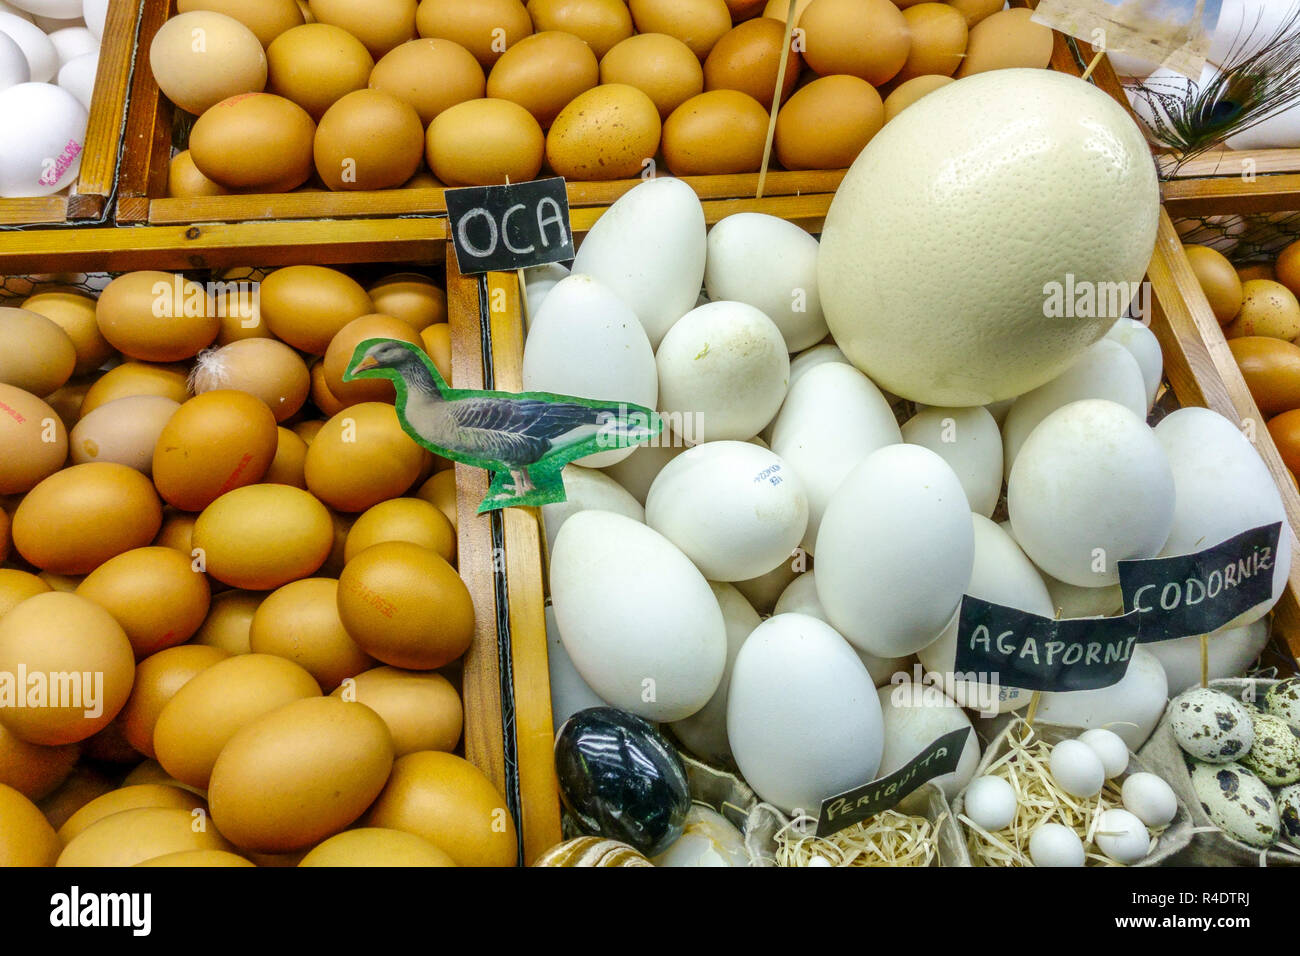 Different sizes of eggs on market, ostrich, goose, hen, birds eggs Stock Photo